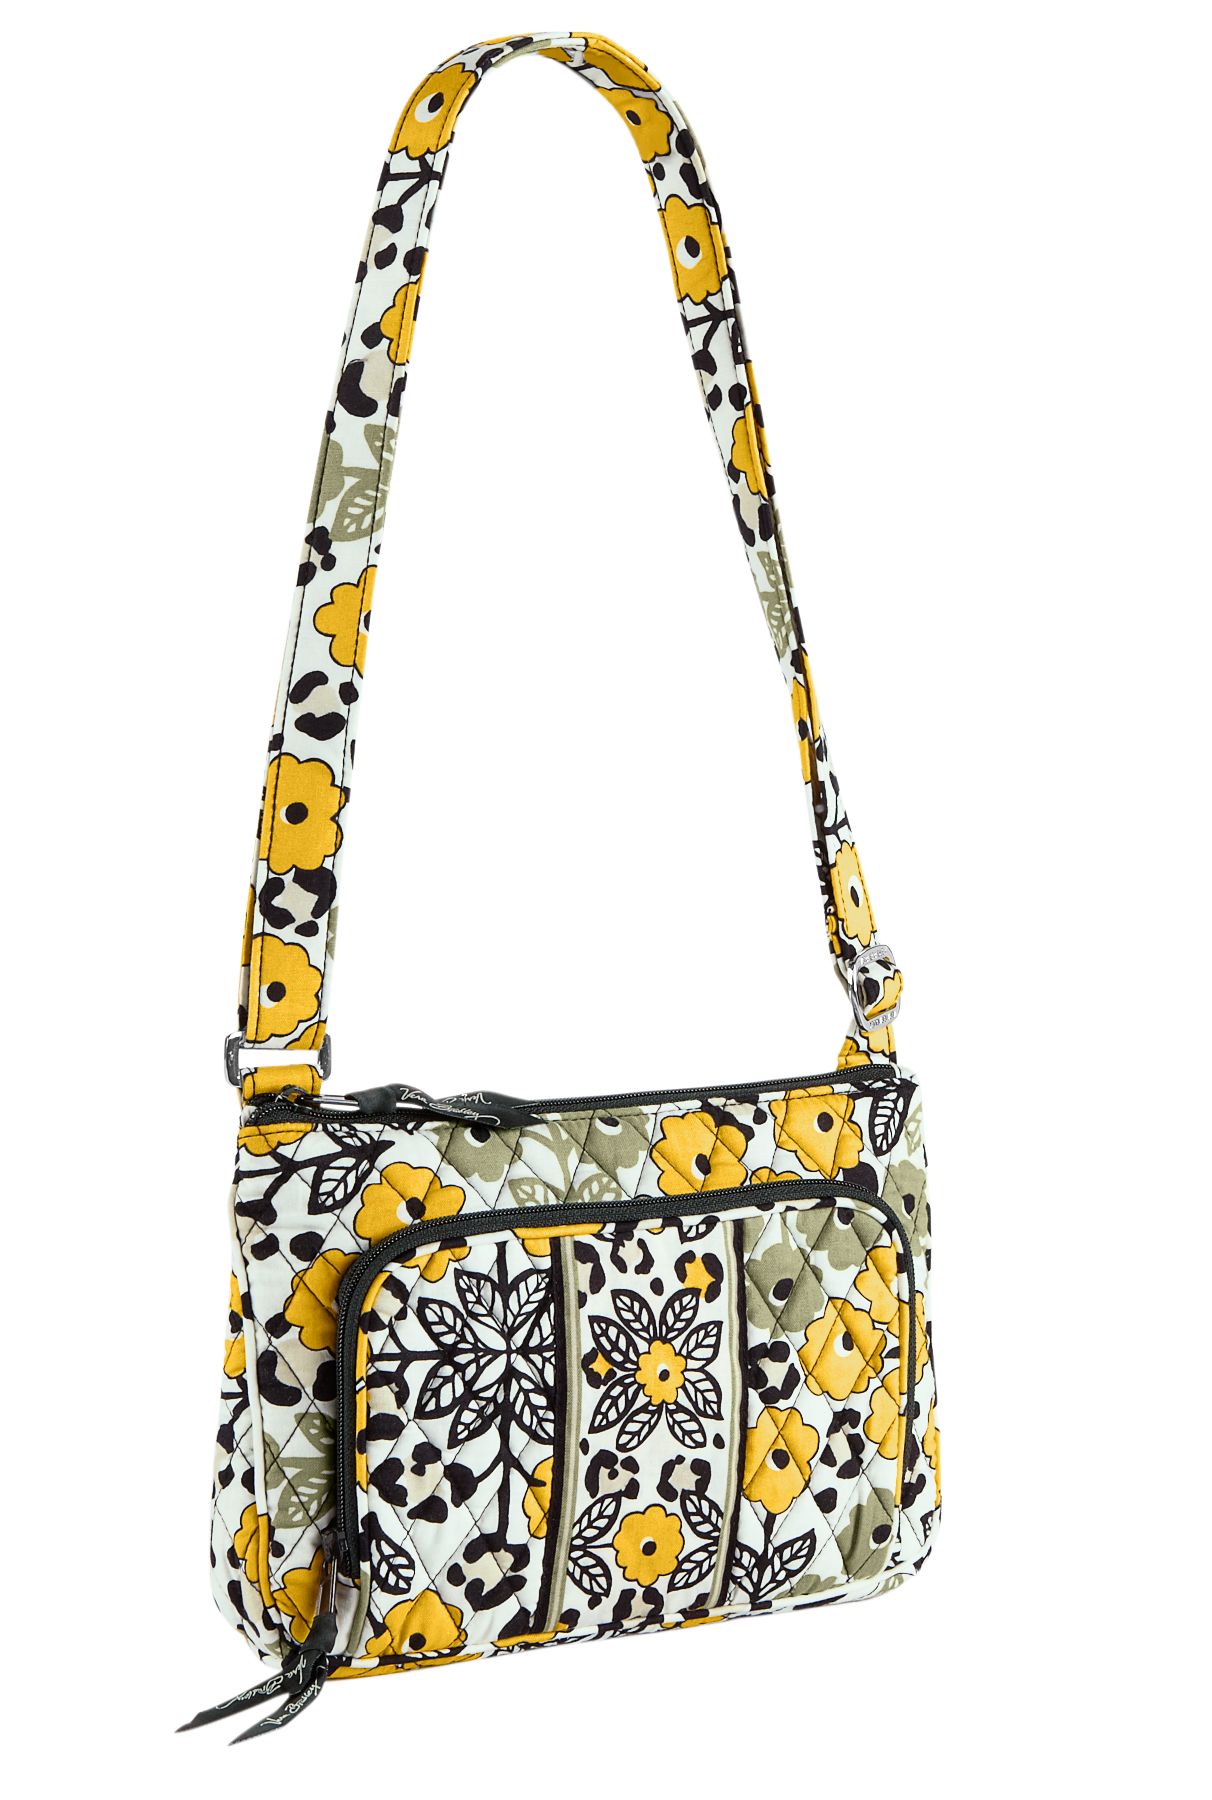 At shopzilla frame bag is Vera Bradley Hipster Cheap timeless look ...